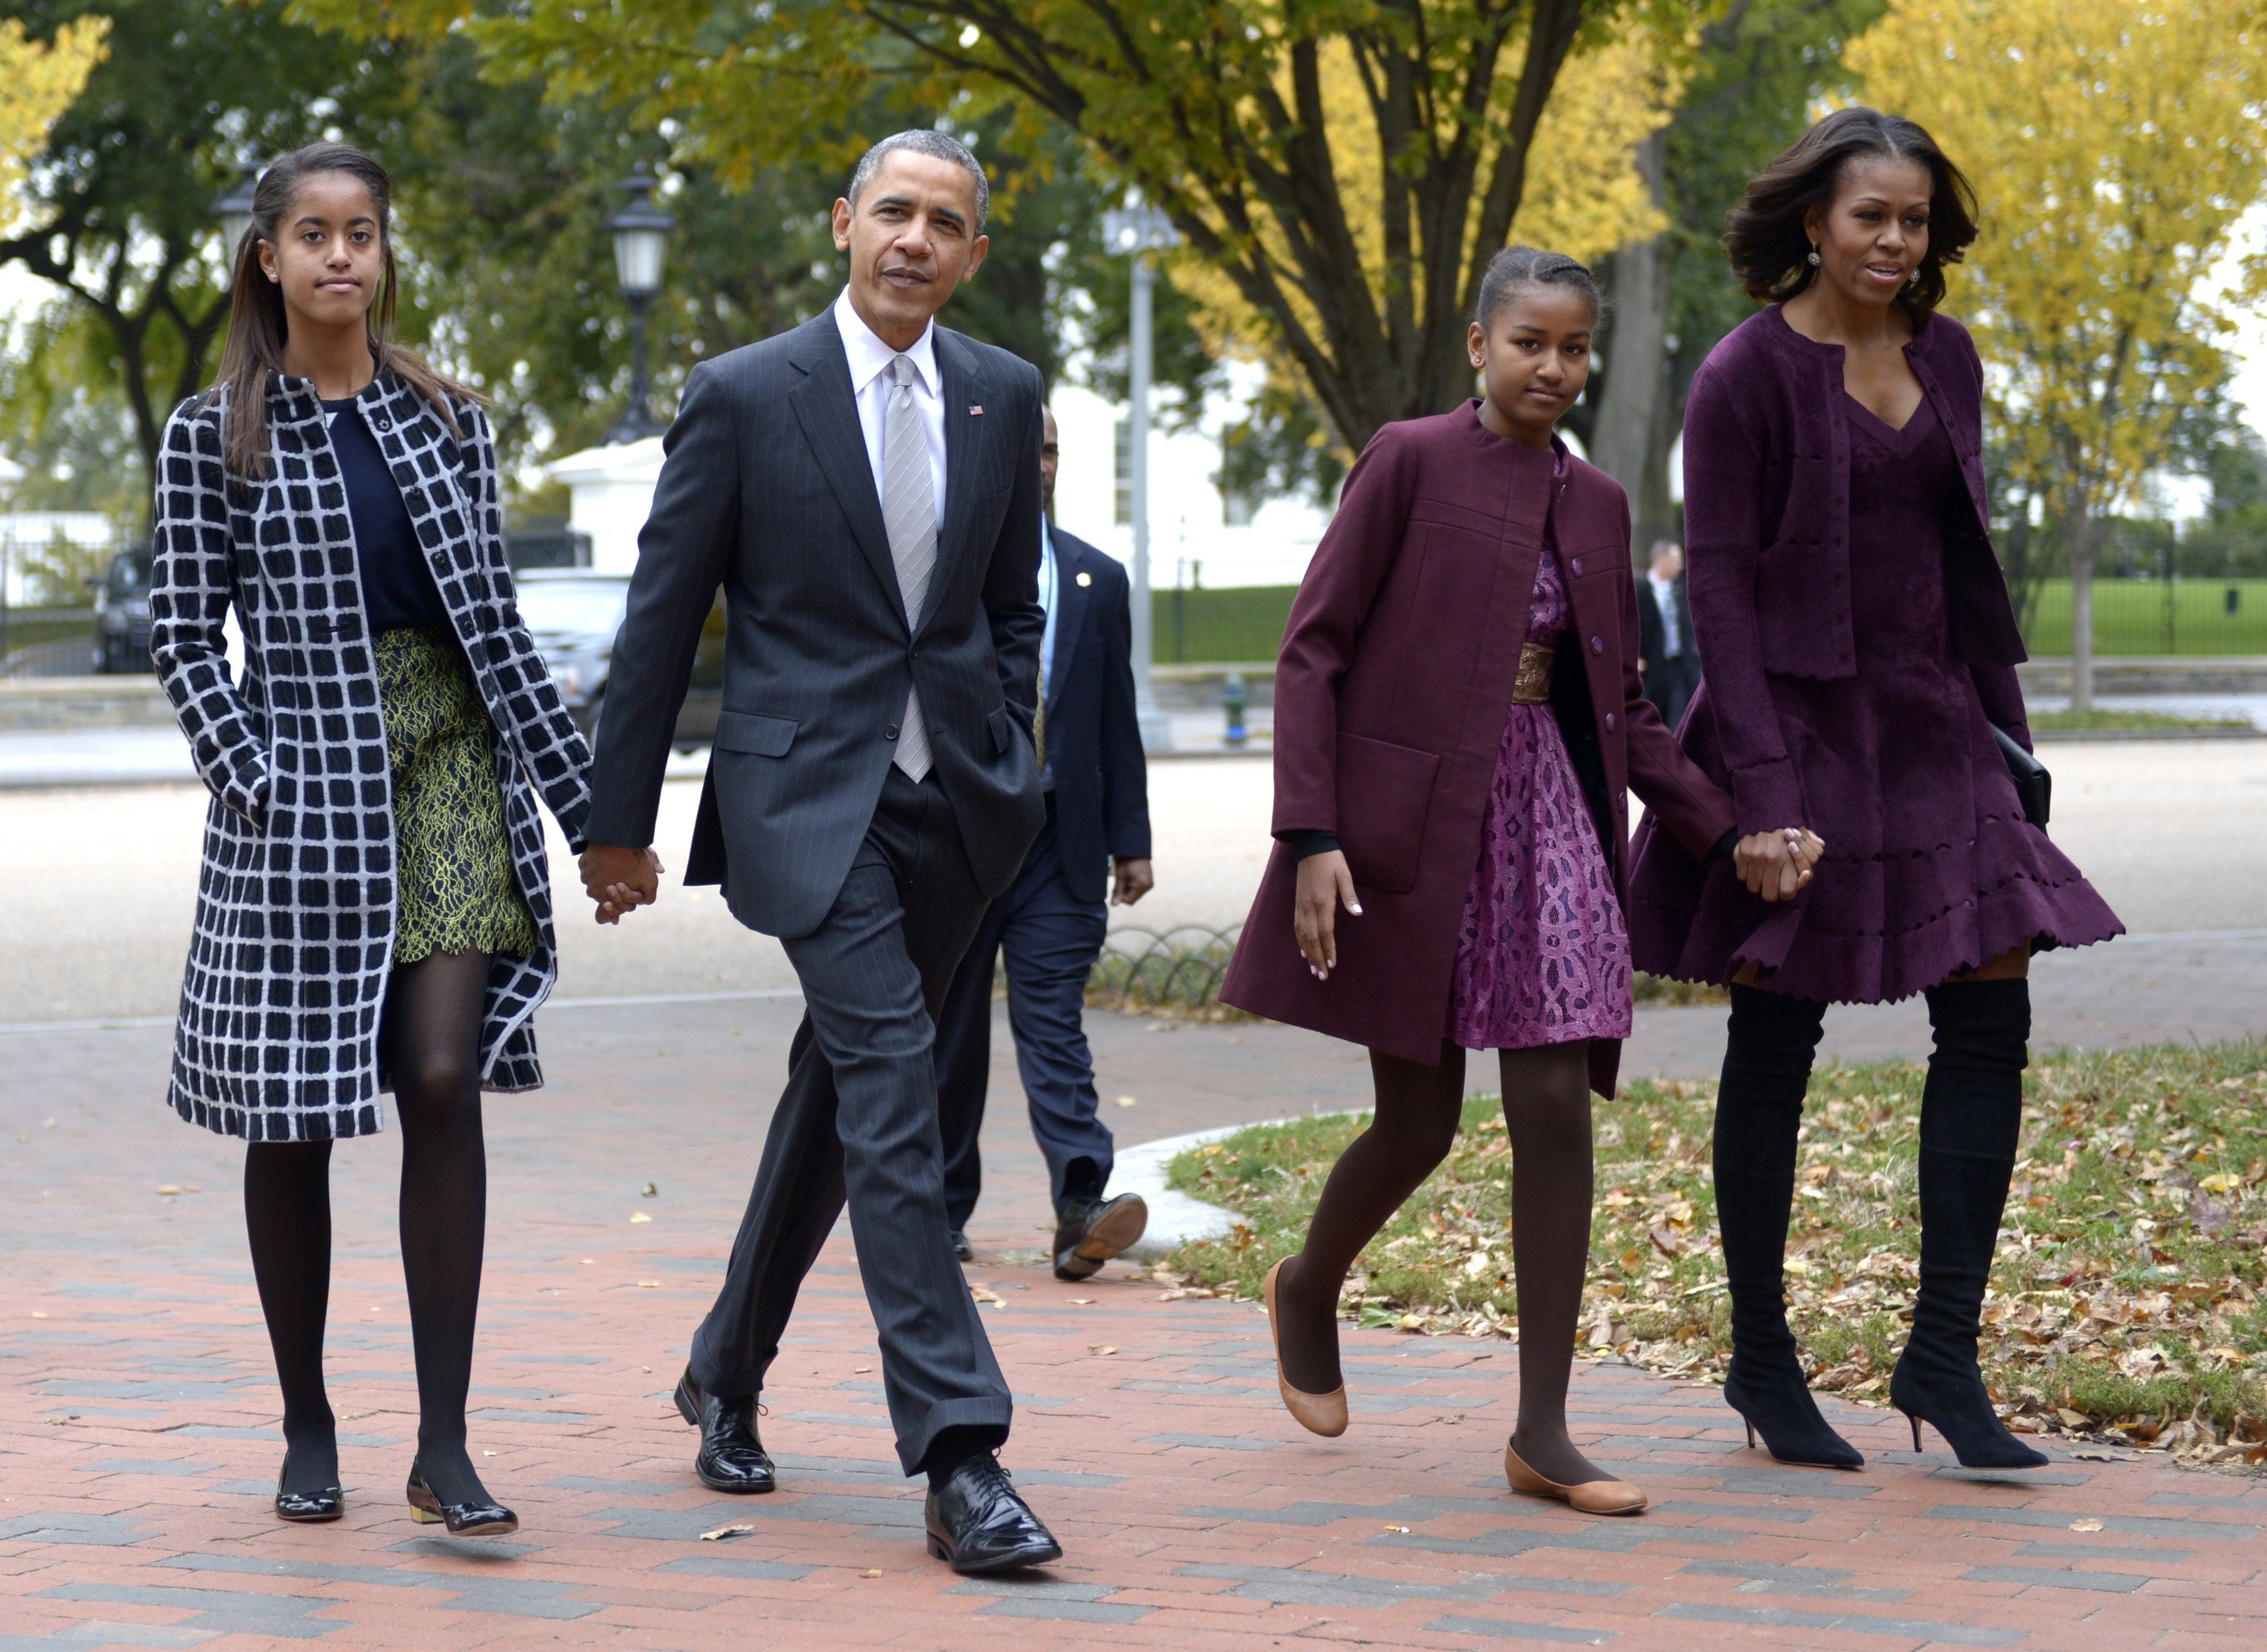  Barack Obama walks with his wife Michelle and two daughters Malia and Sasha to attend service October 27, 2013 in Washington, DC. | Photo: GettyImages